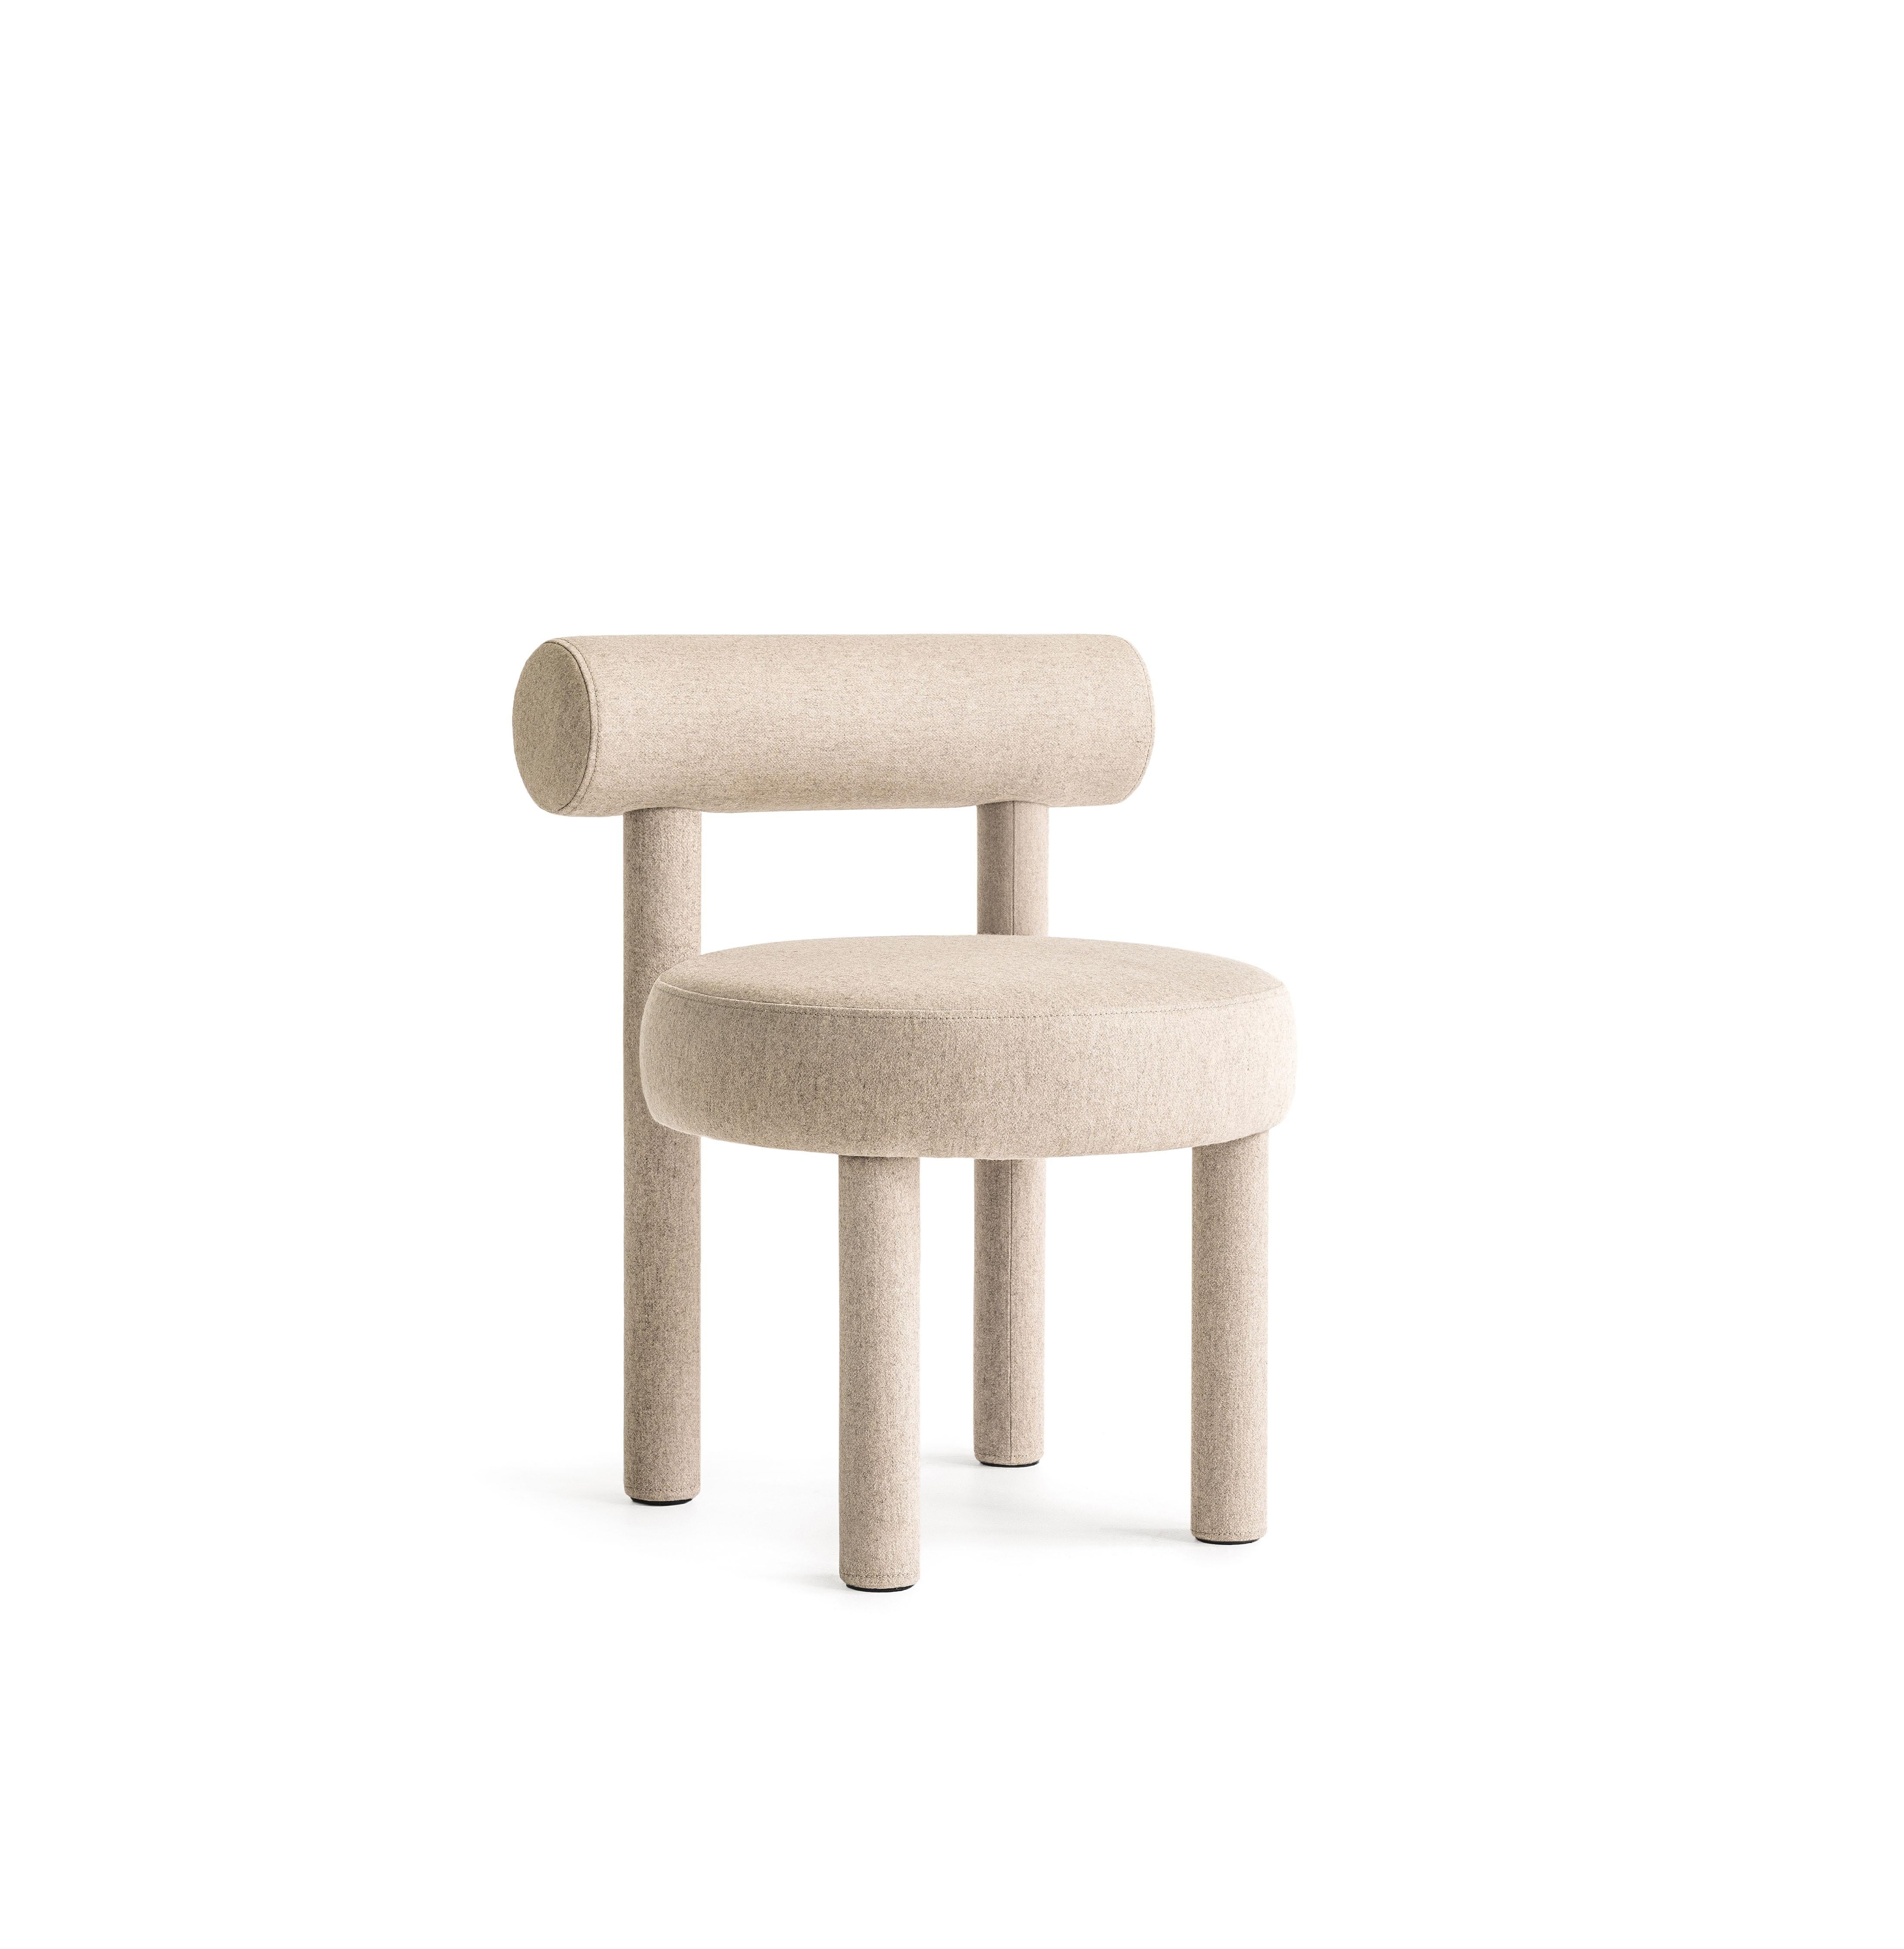 Kvadrat Zero/ JAB Boucle Gropius chair CS1 by NOOM
Dimensions: 57cm x 57cm x H 74cm 
Materials: Wood, foam rubber, injection-molded soft foam. 
Also available in other materials.

The New NOOM furniture collection is dedicated to the 100th